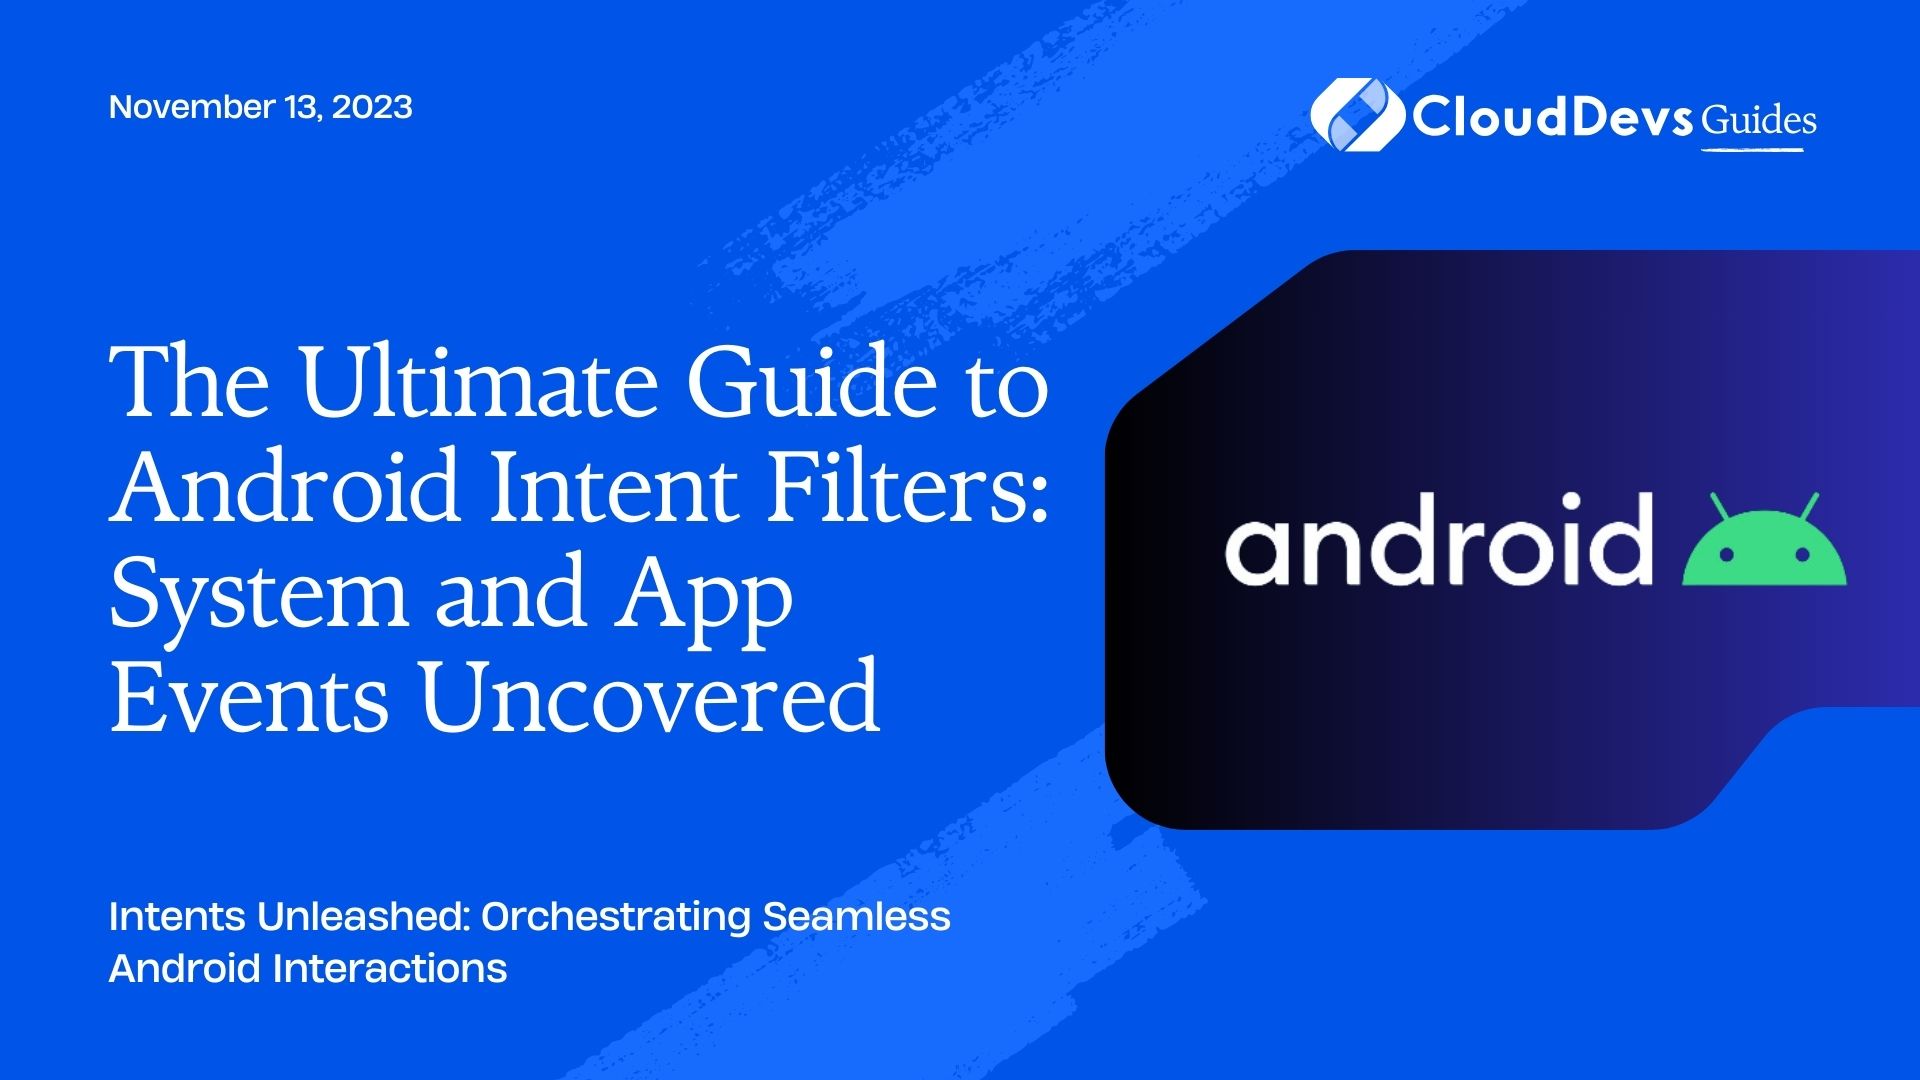 The Ultimate Guide to Android Intent Filters: System and App Events Uncovered